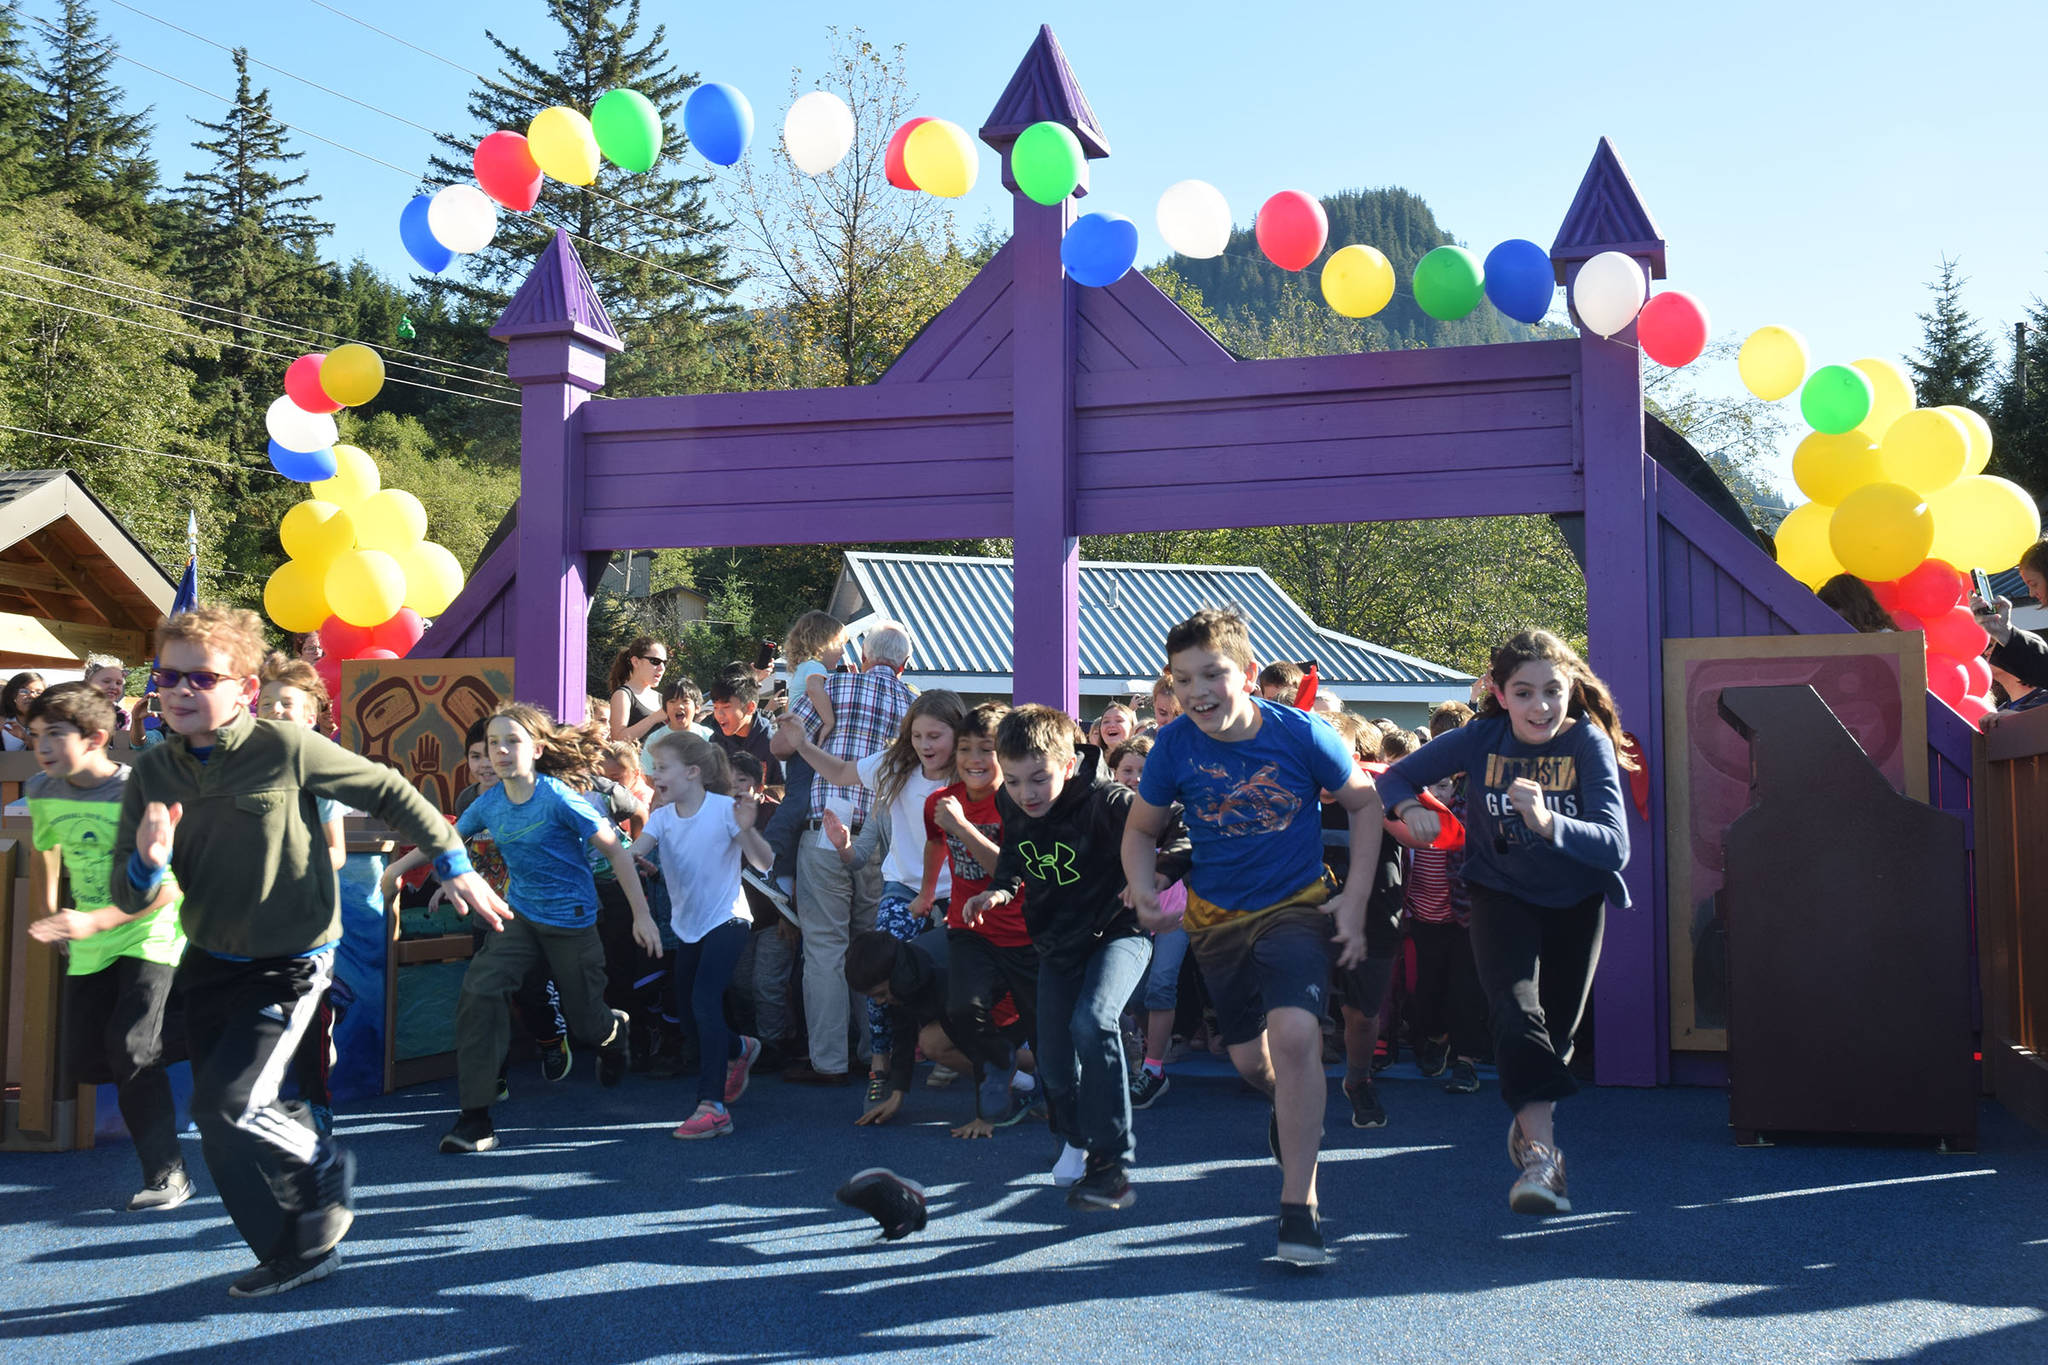 Children run into Project Playground during a grand reopening at Twin Lakes on Saturday, Sept. 29, 2018. (Kevin Gullufsen | Juneau Empire)